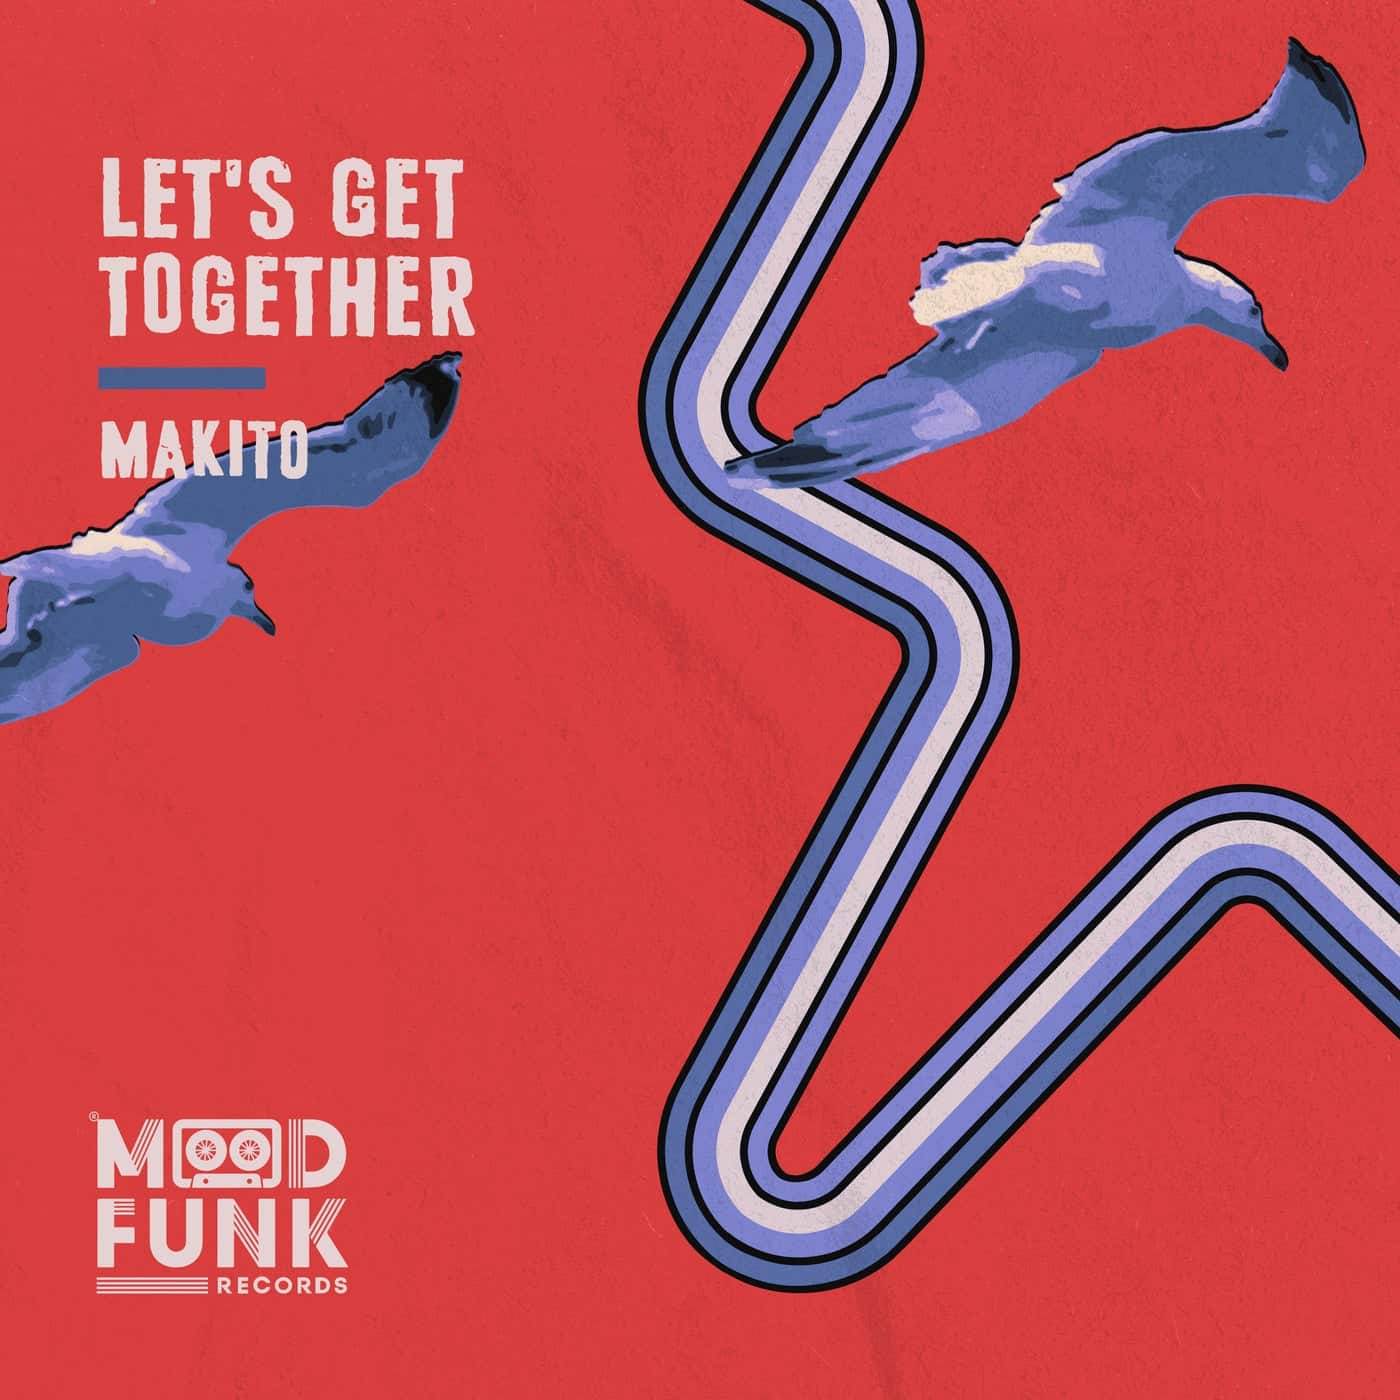 image cover: Let's Get Together by Makito on Mood Funk Records